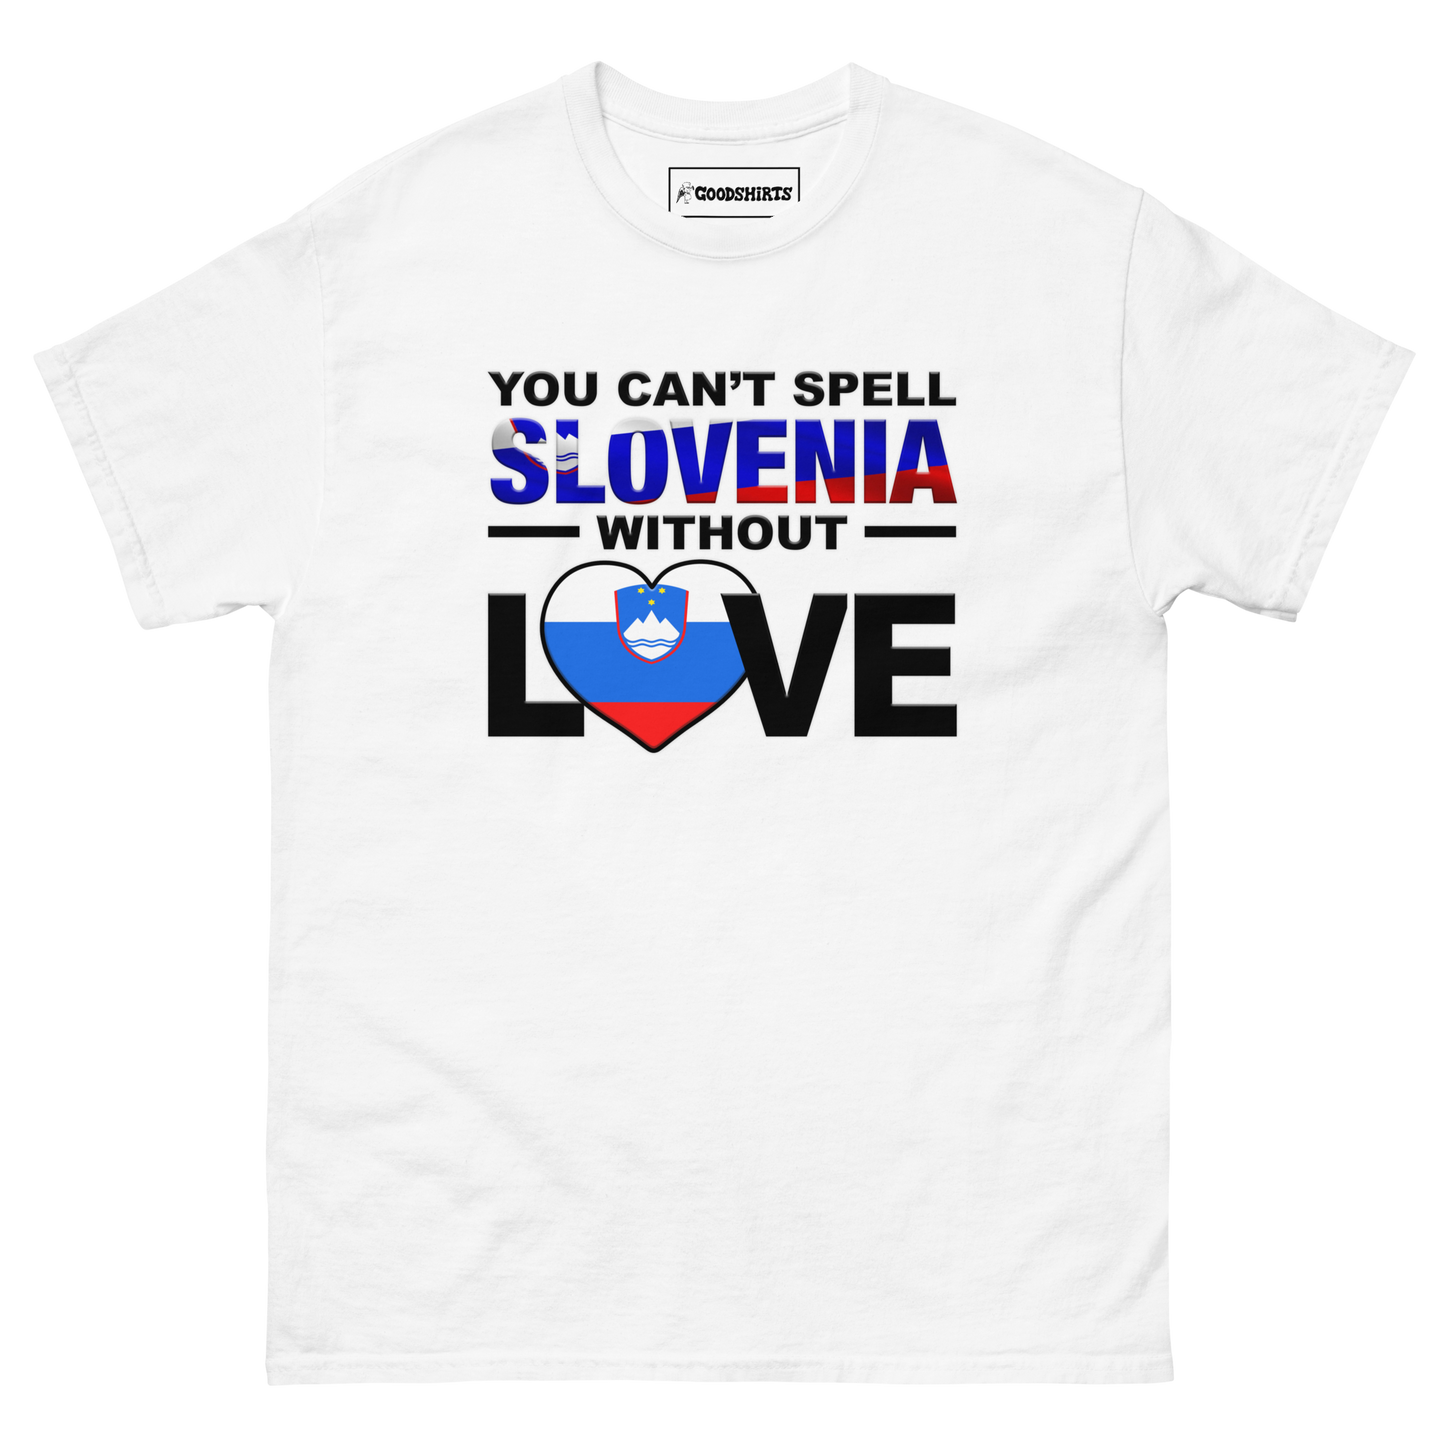 You Can't Spell Slovenia Without Love.